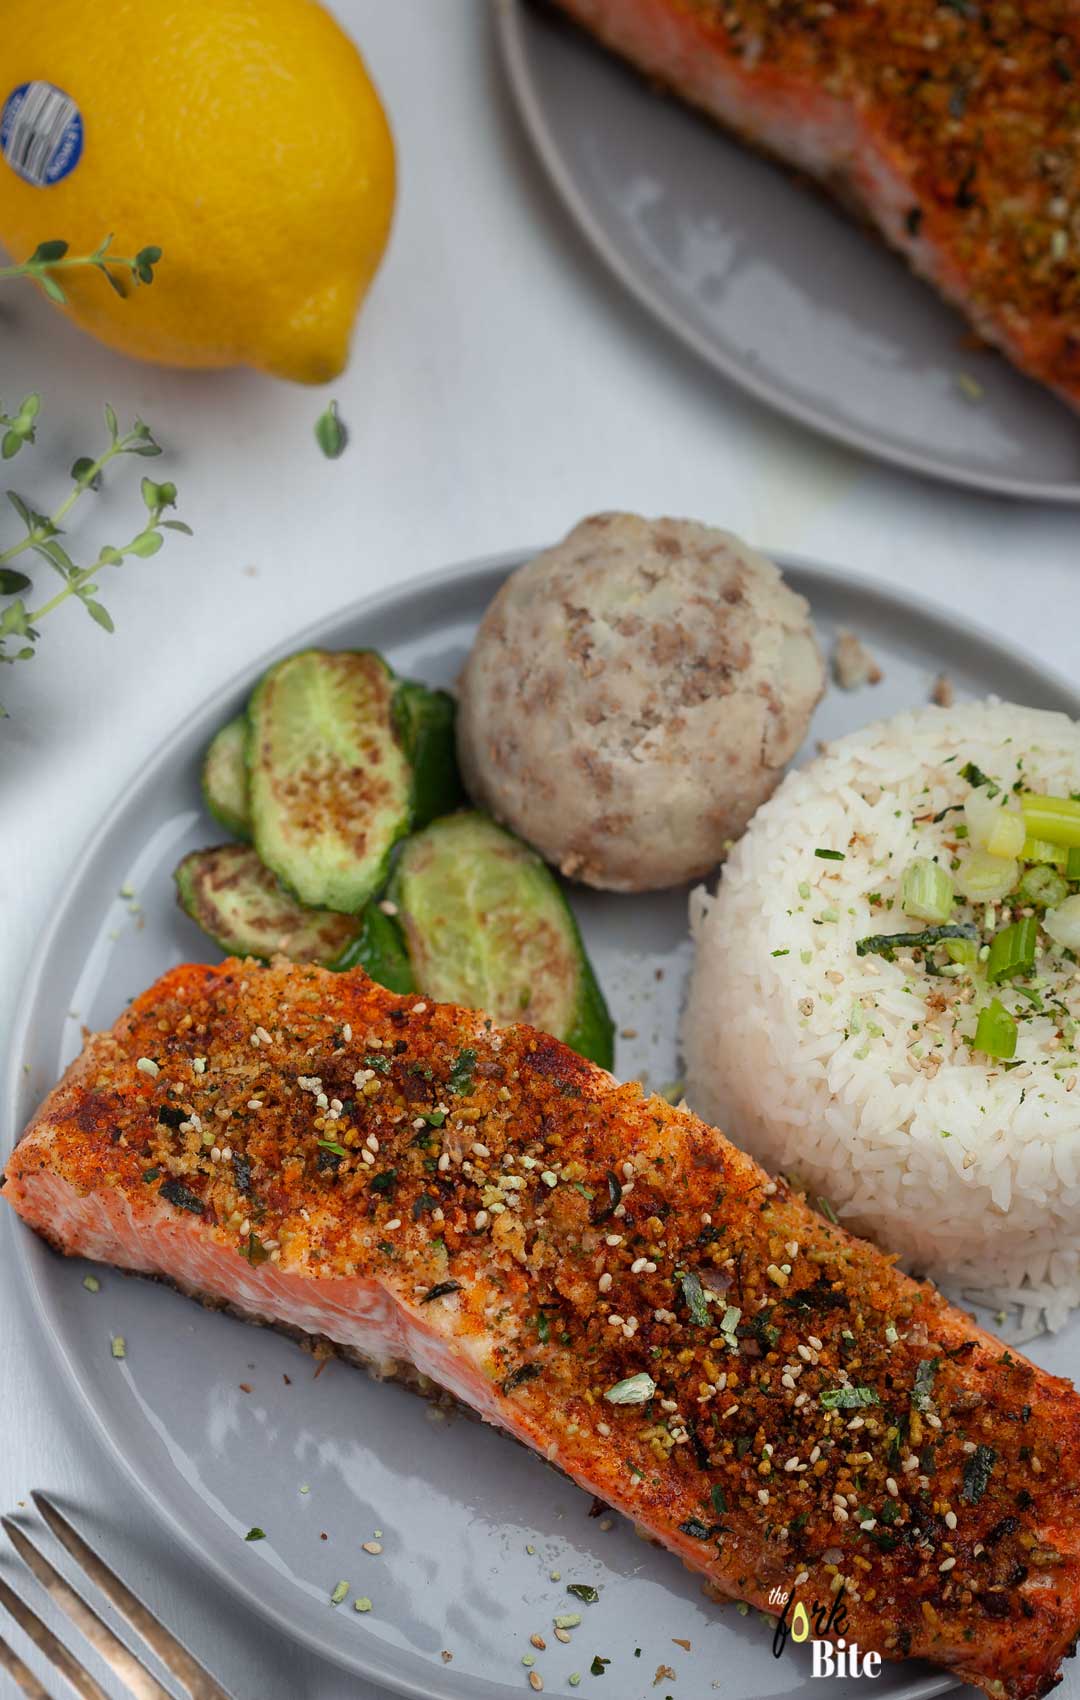 I never thought making this Baked Furikake Salmon recipe using an air fryer would result in the juiciest, most tender salmon each time.